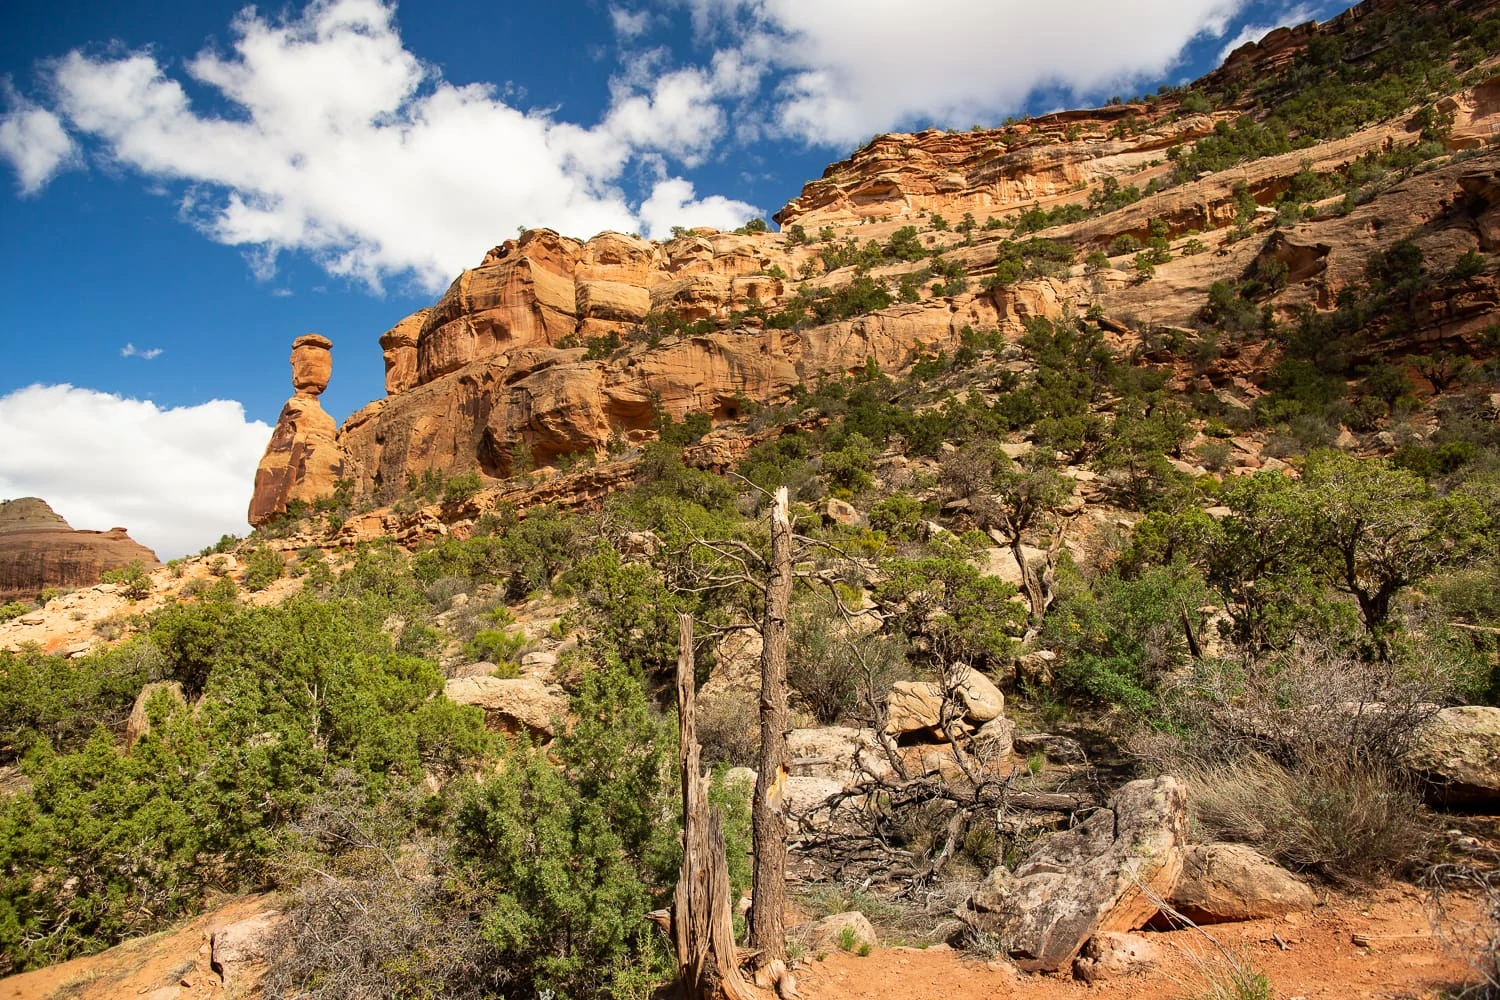 The uphill slope towards Balanced Rock in Colorado National Monument with blue sky and puffy white clouds.